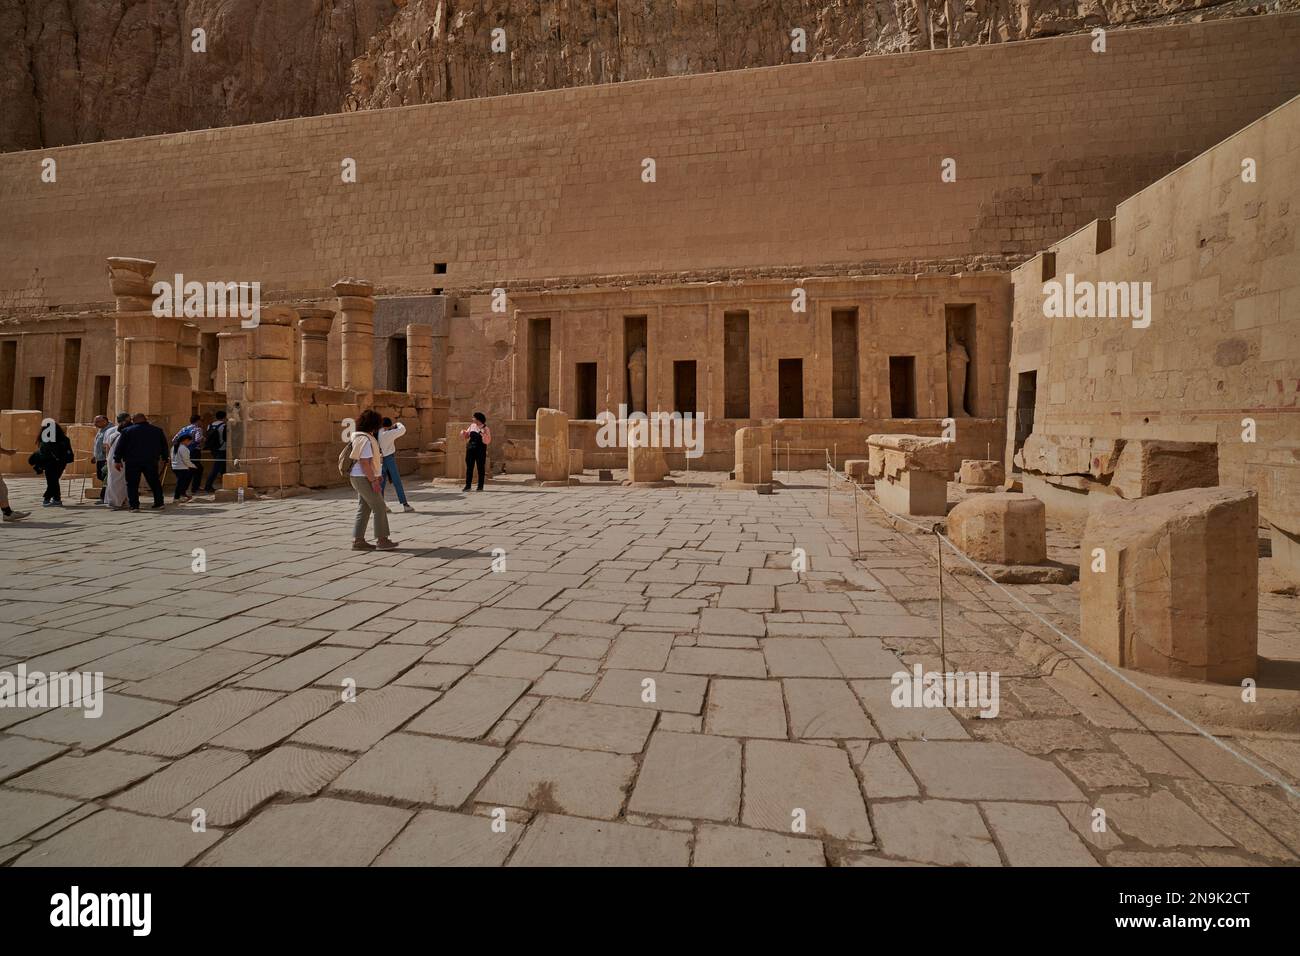 Mortuary Temple of hatshepsut in Luxor, Egypt  built during the reign of Pharaoh Hatshepsut of the Eighteenth Dynasty of Egypt. Daylight view Stock Photo